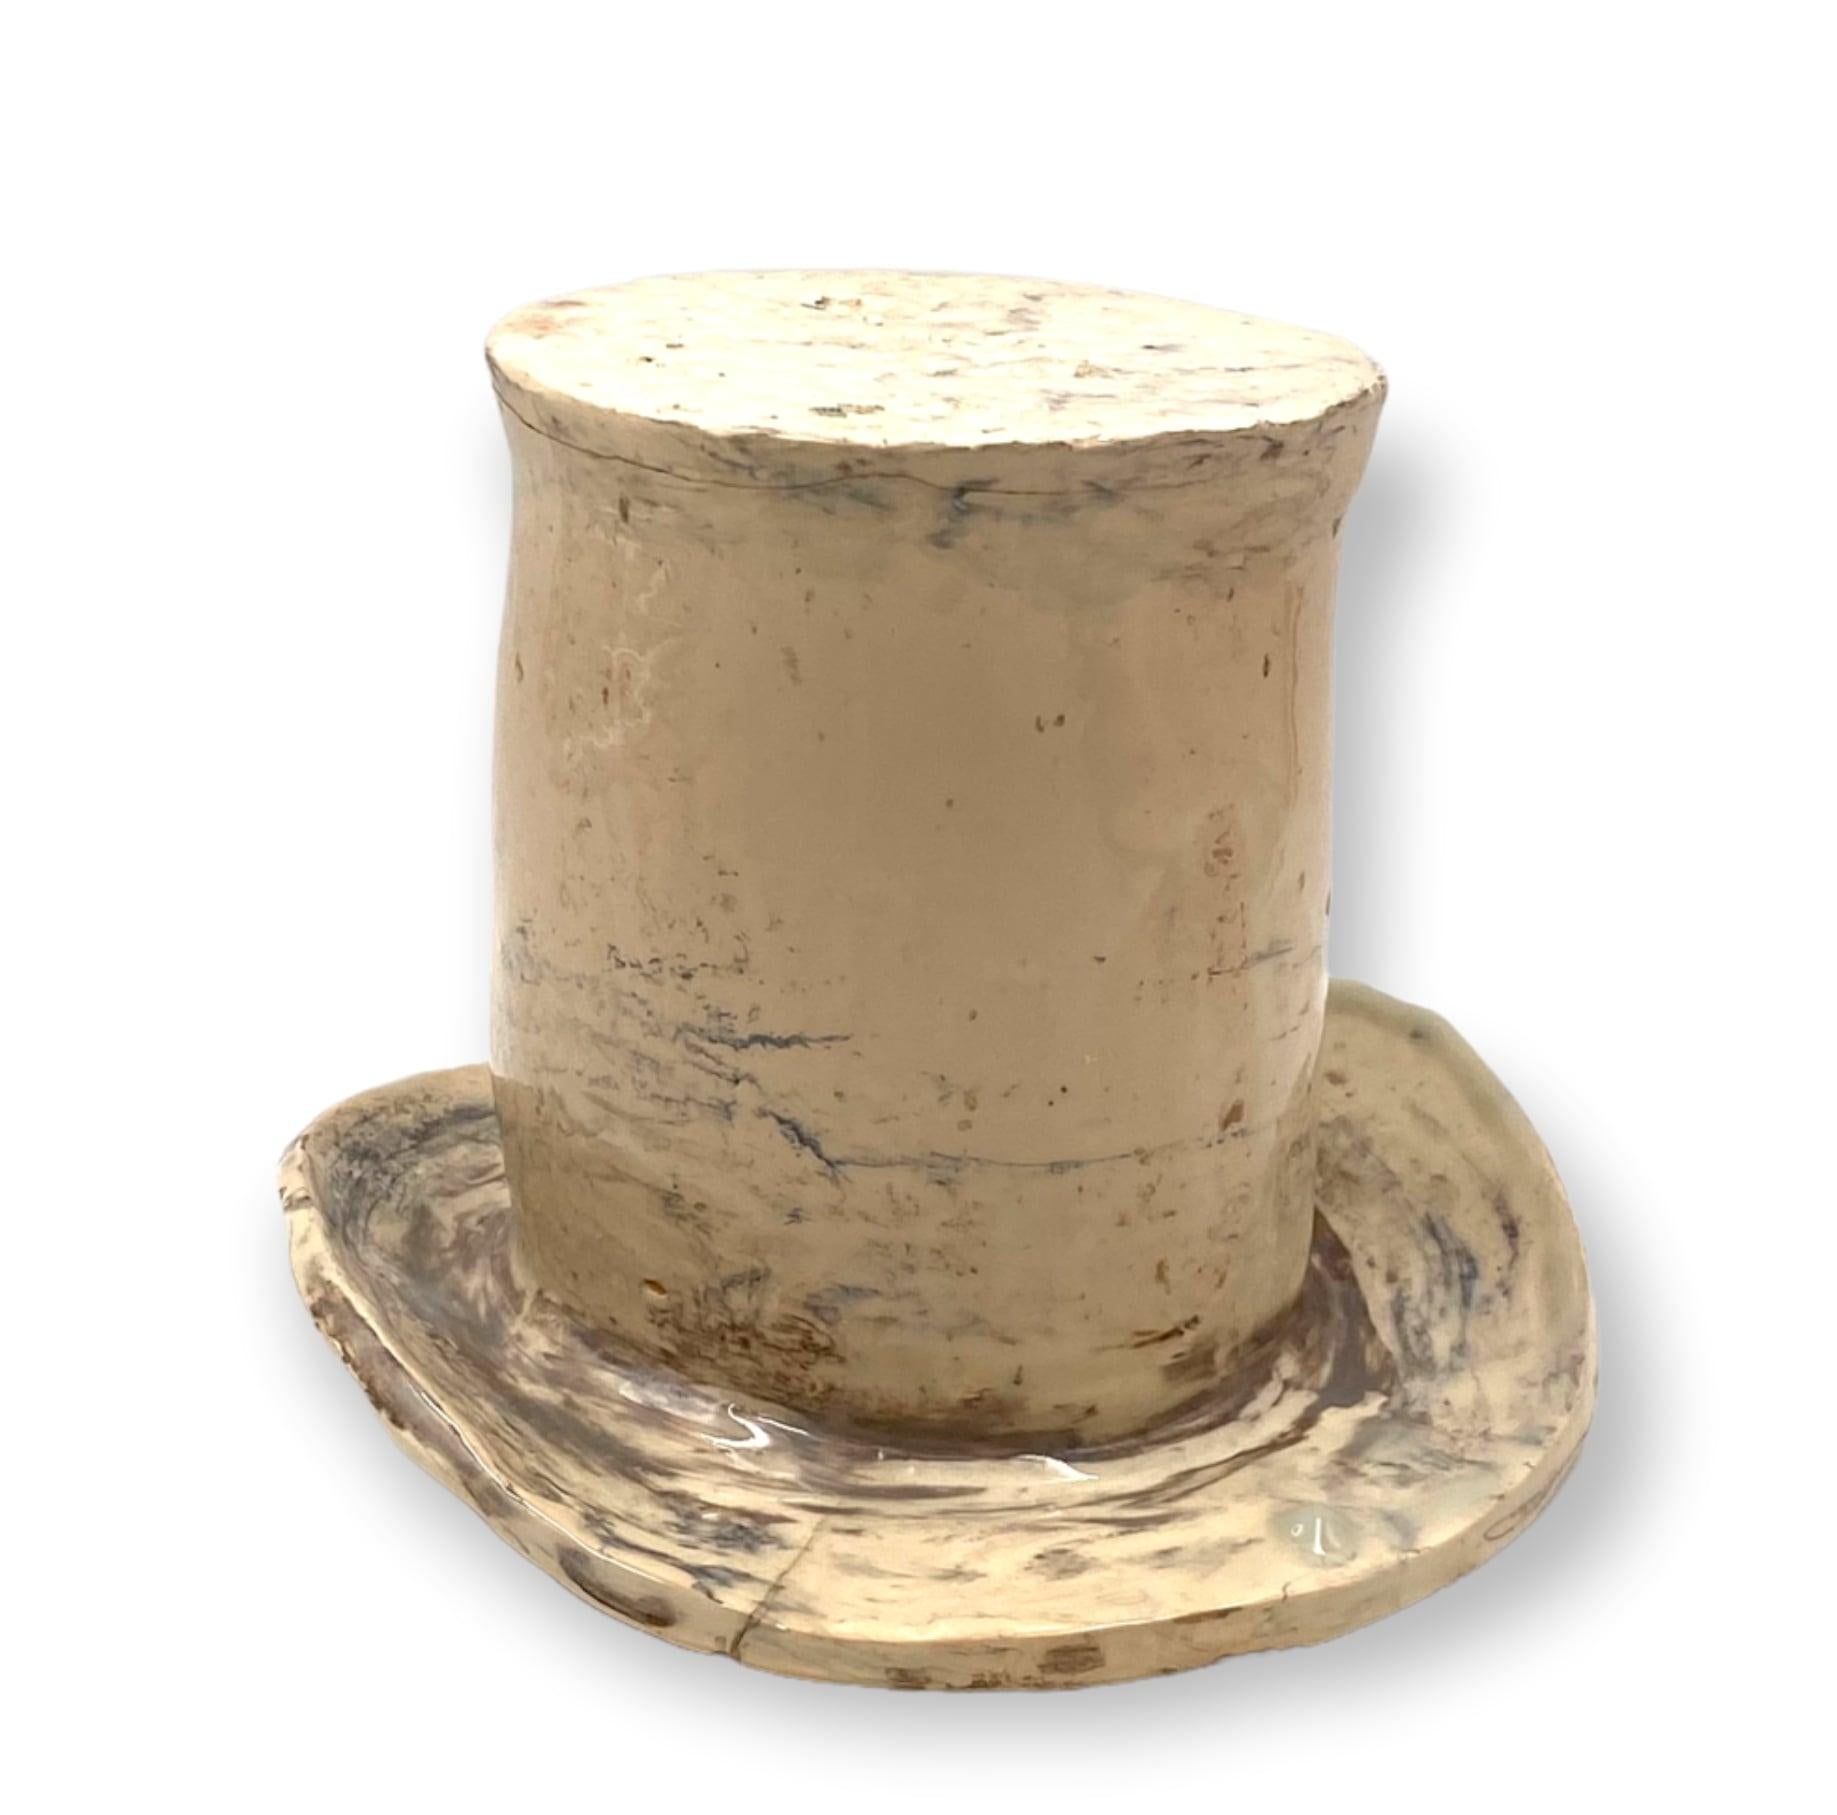 Organic Modern Great White Topper/Cylinder Hat Ceramic Sculpture, France, 1950s For Sale